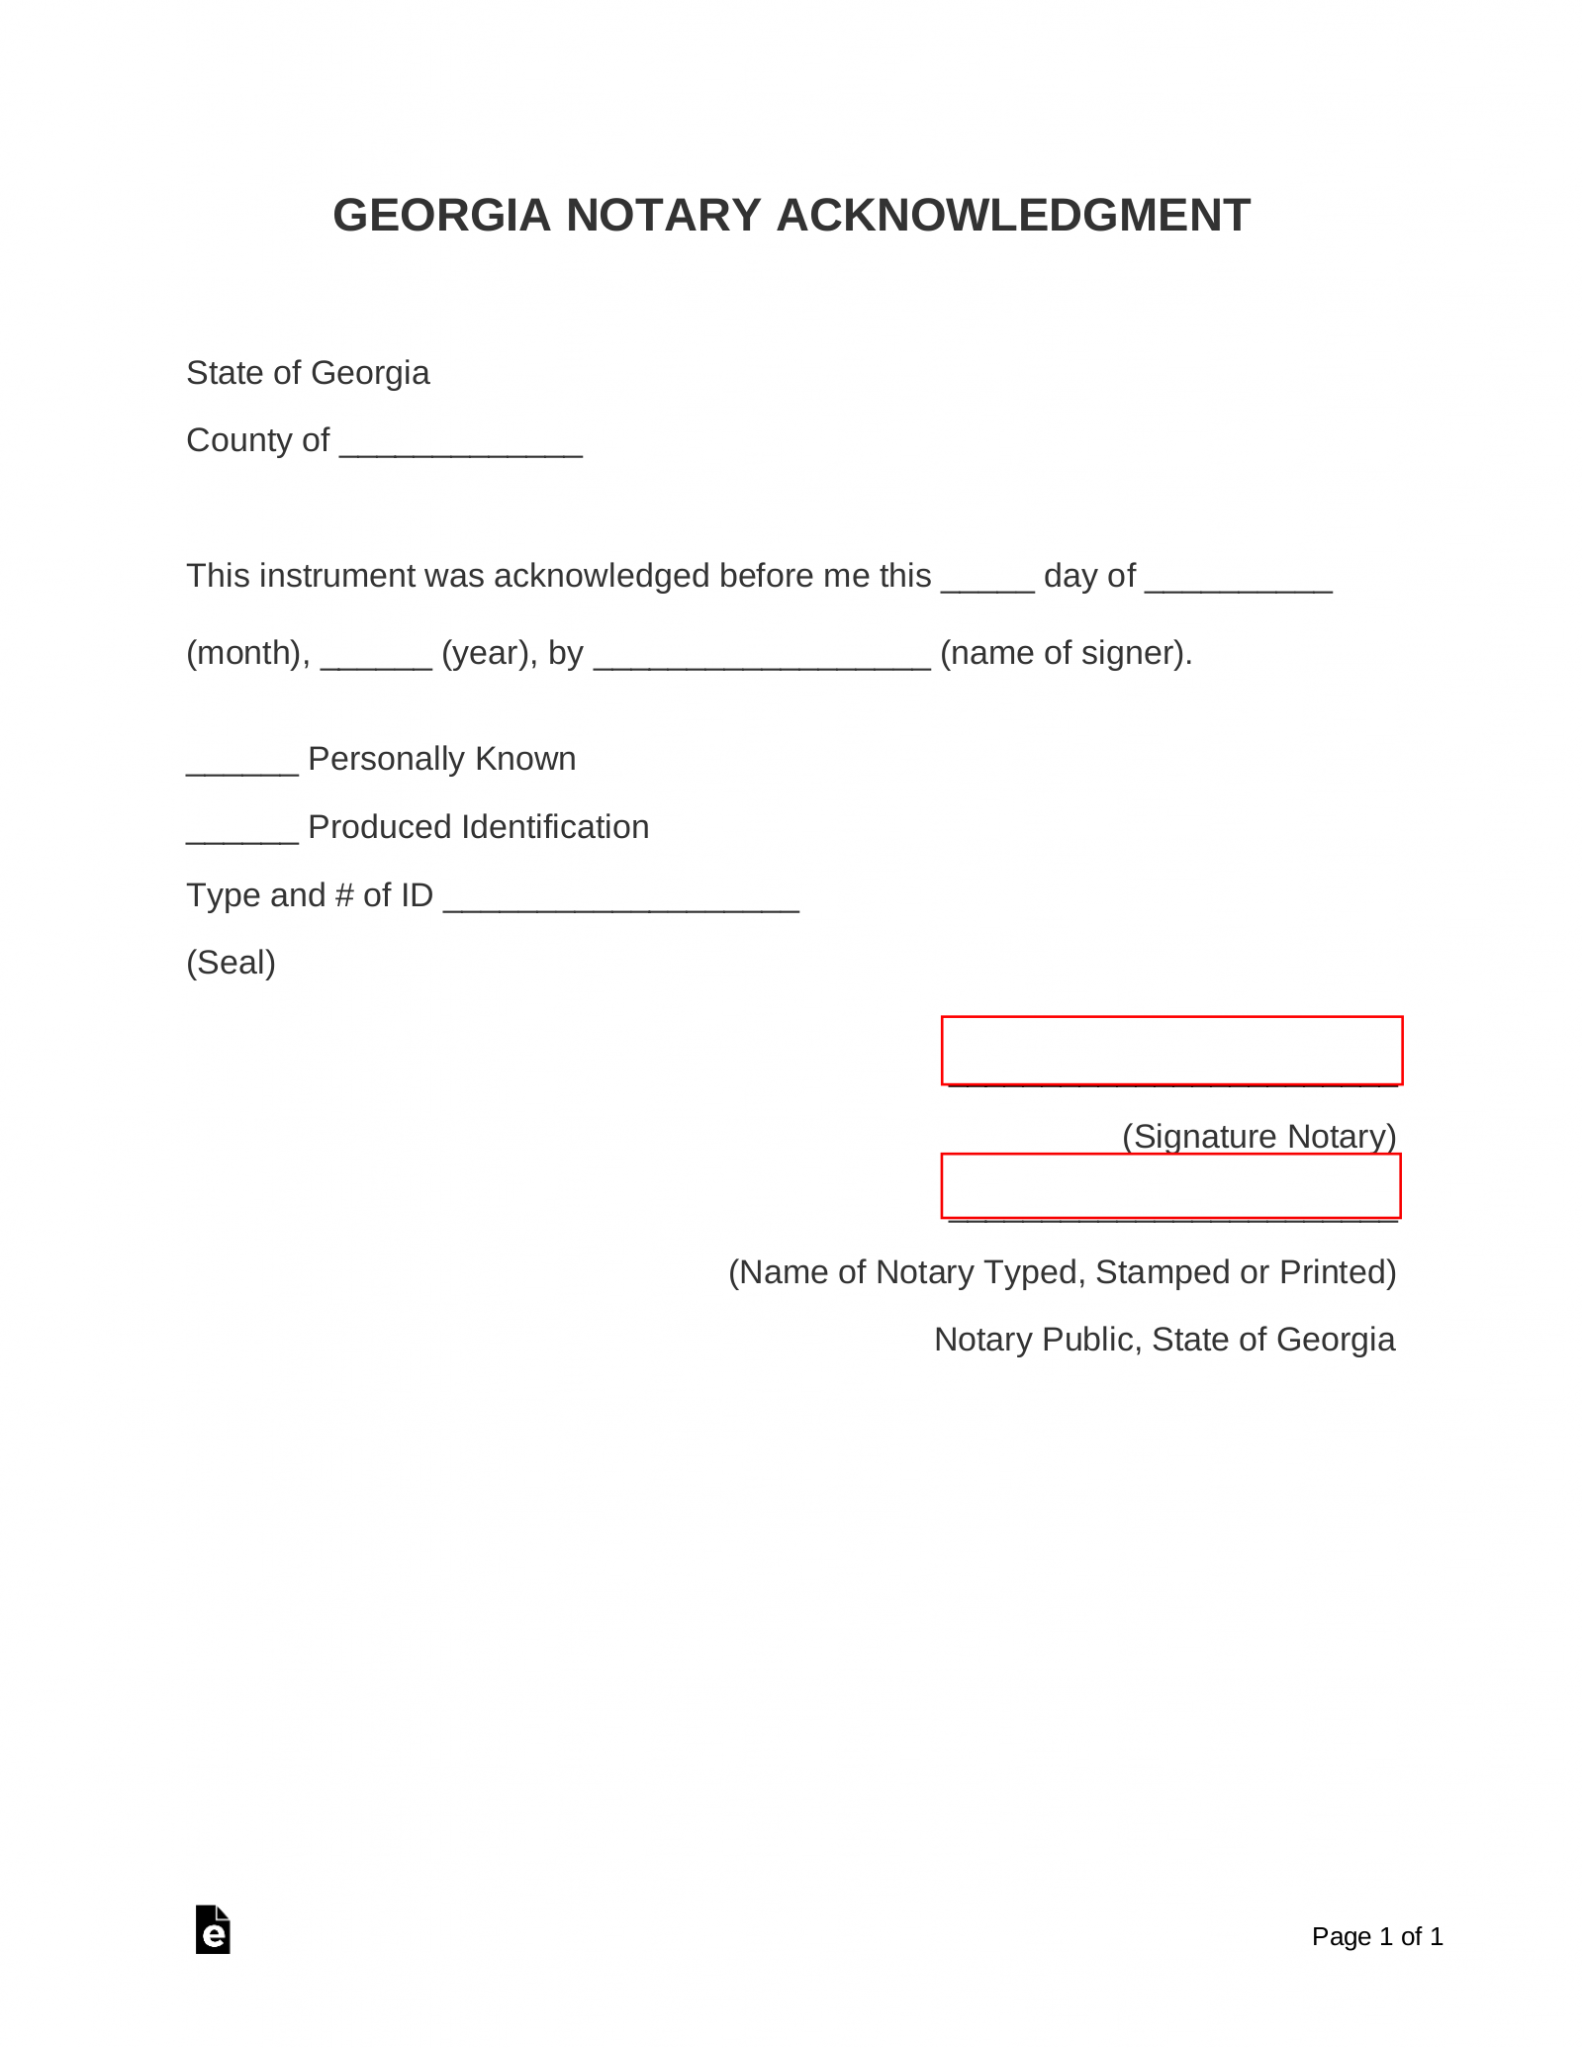 free-georgia-notary-acknowledgment-form-word-pdf-eforms